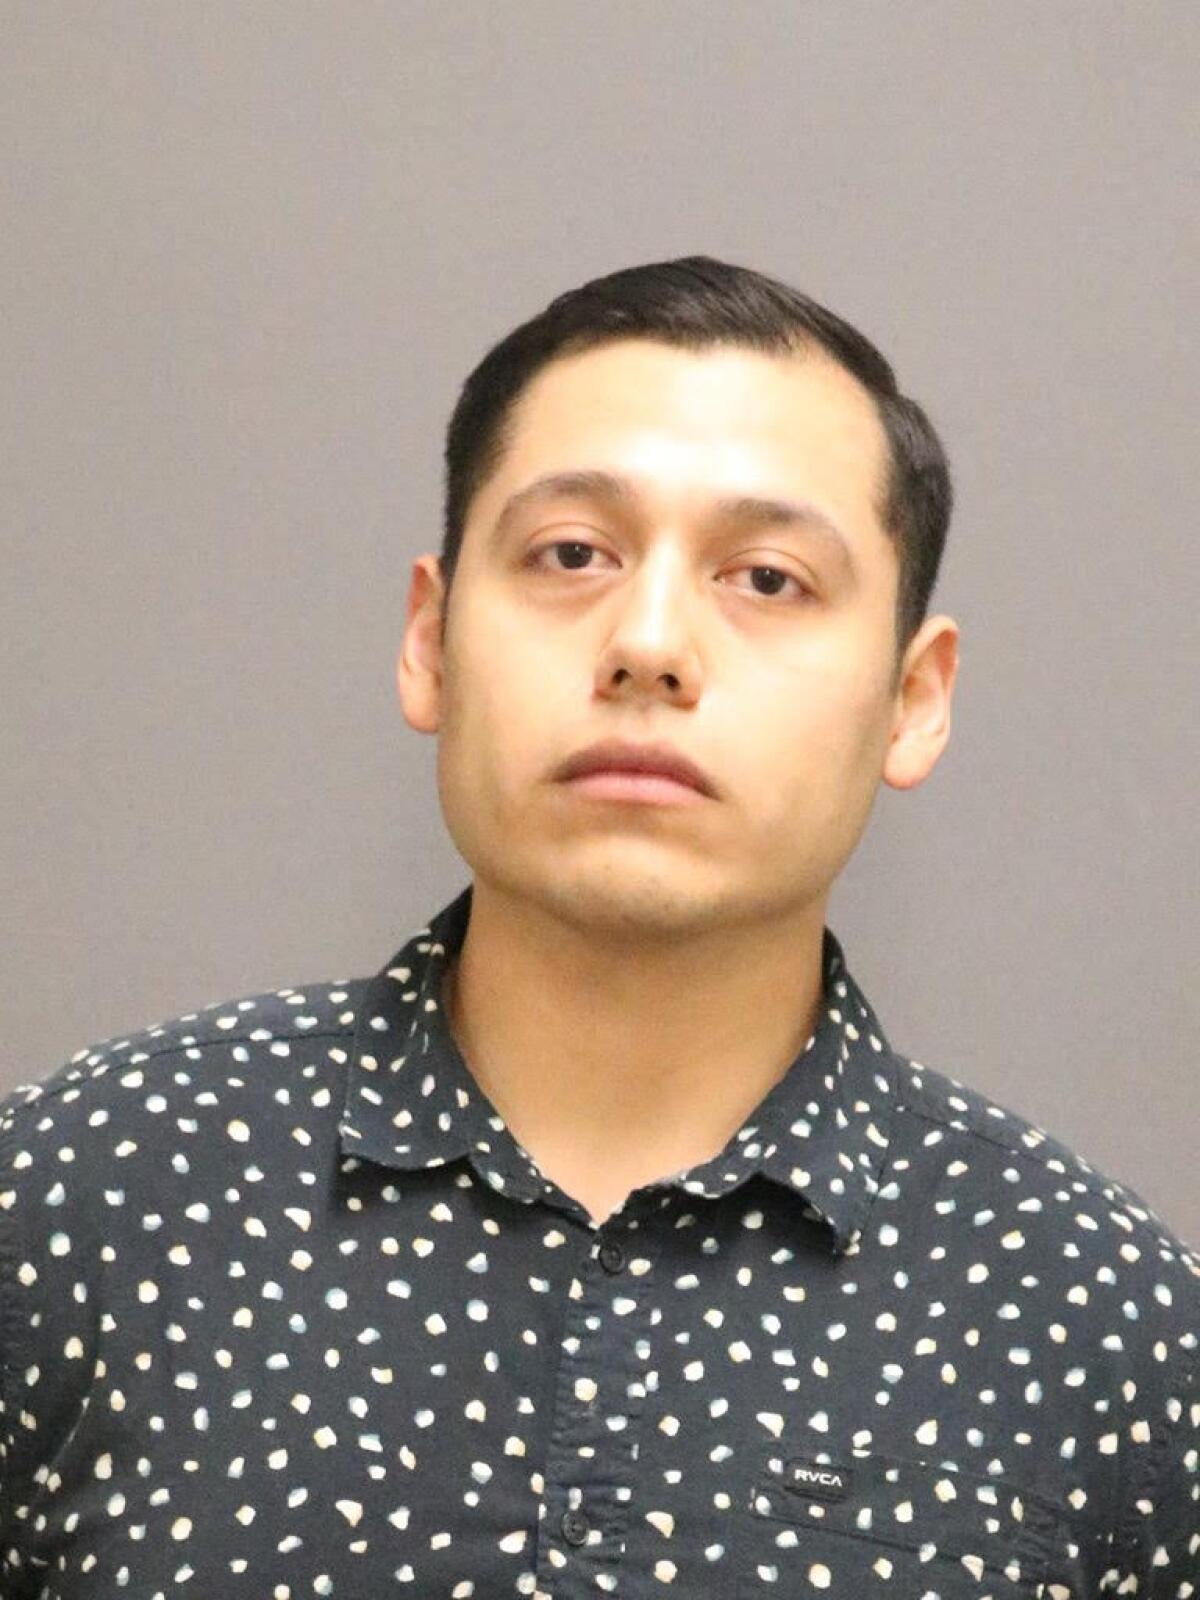 Dino Rojas-Moreno, pictured, has been arrested as a suspect in connection with the murder of Tatum Goodwin in Laguna Beach.